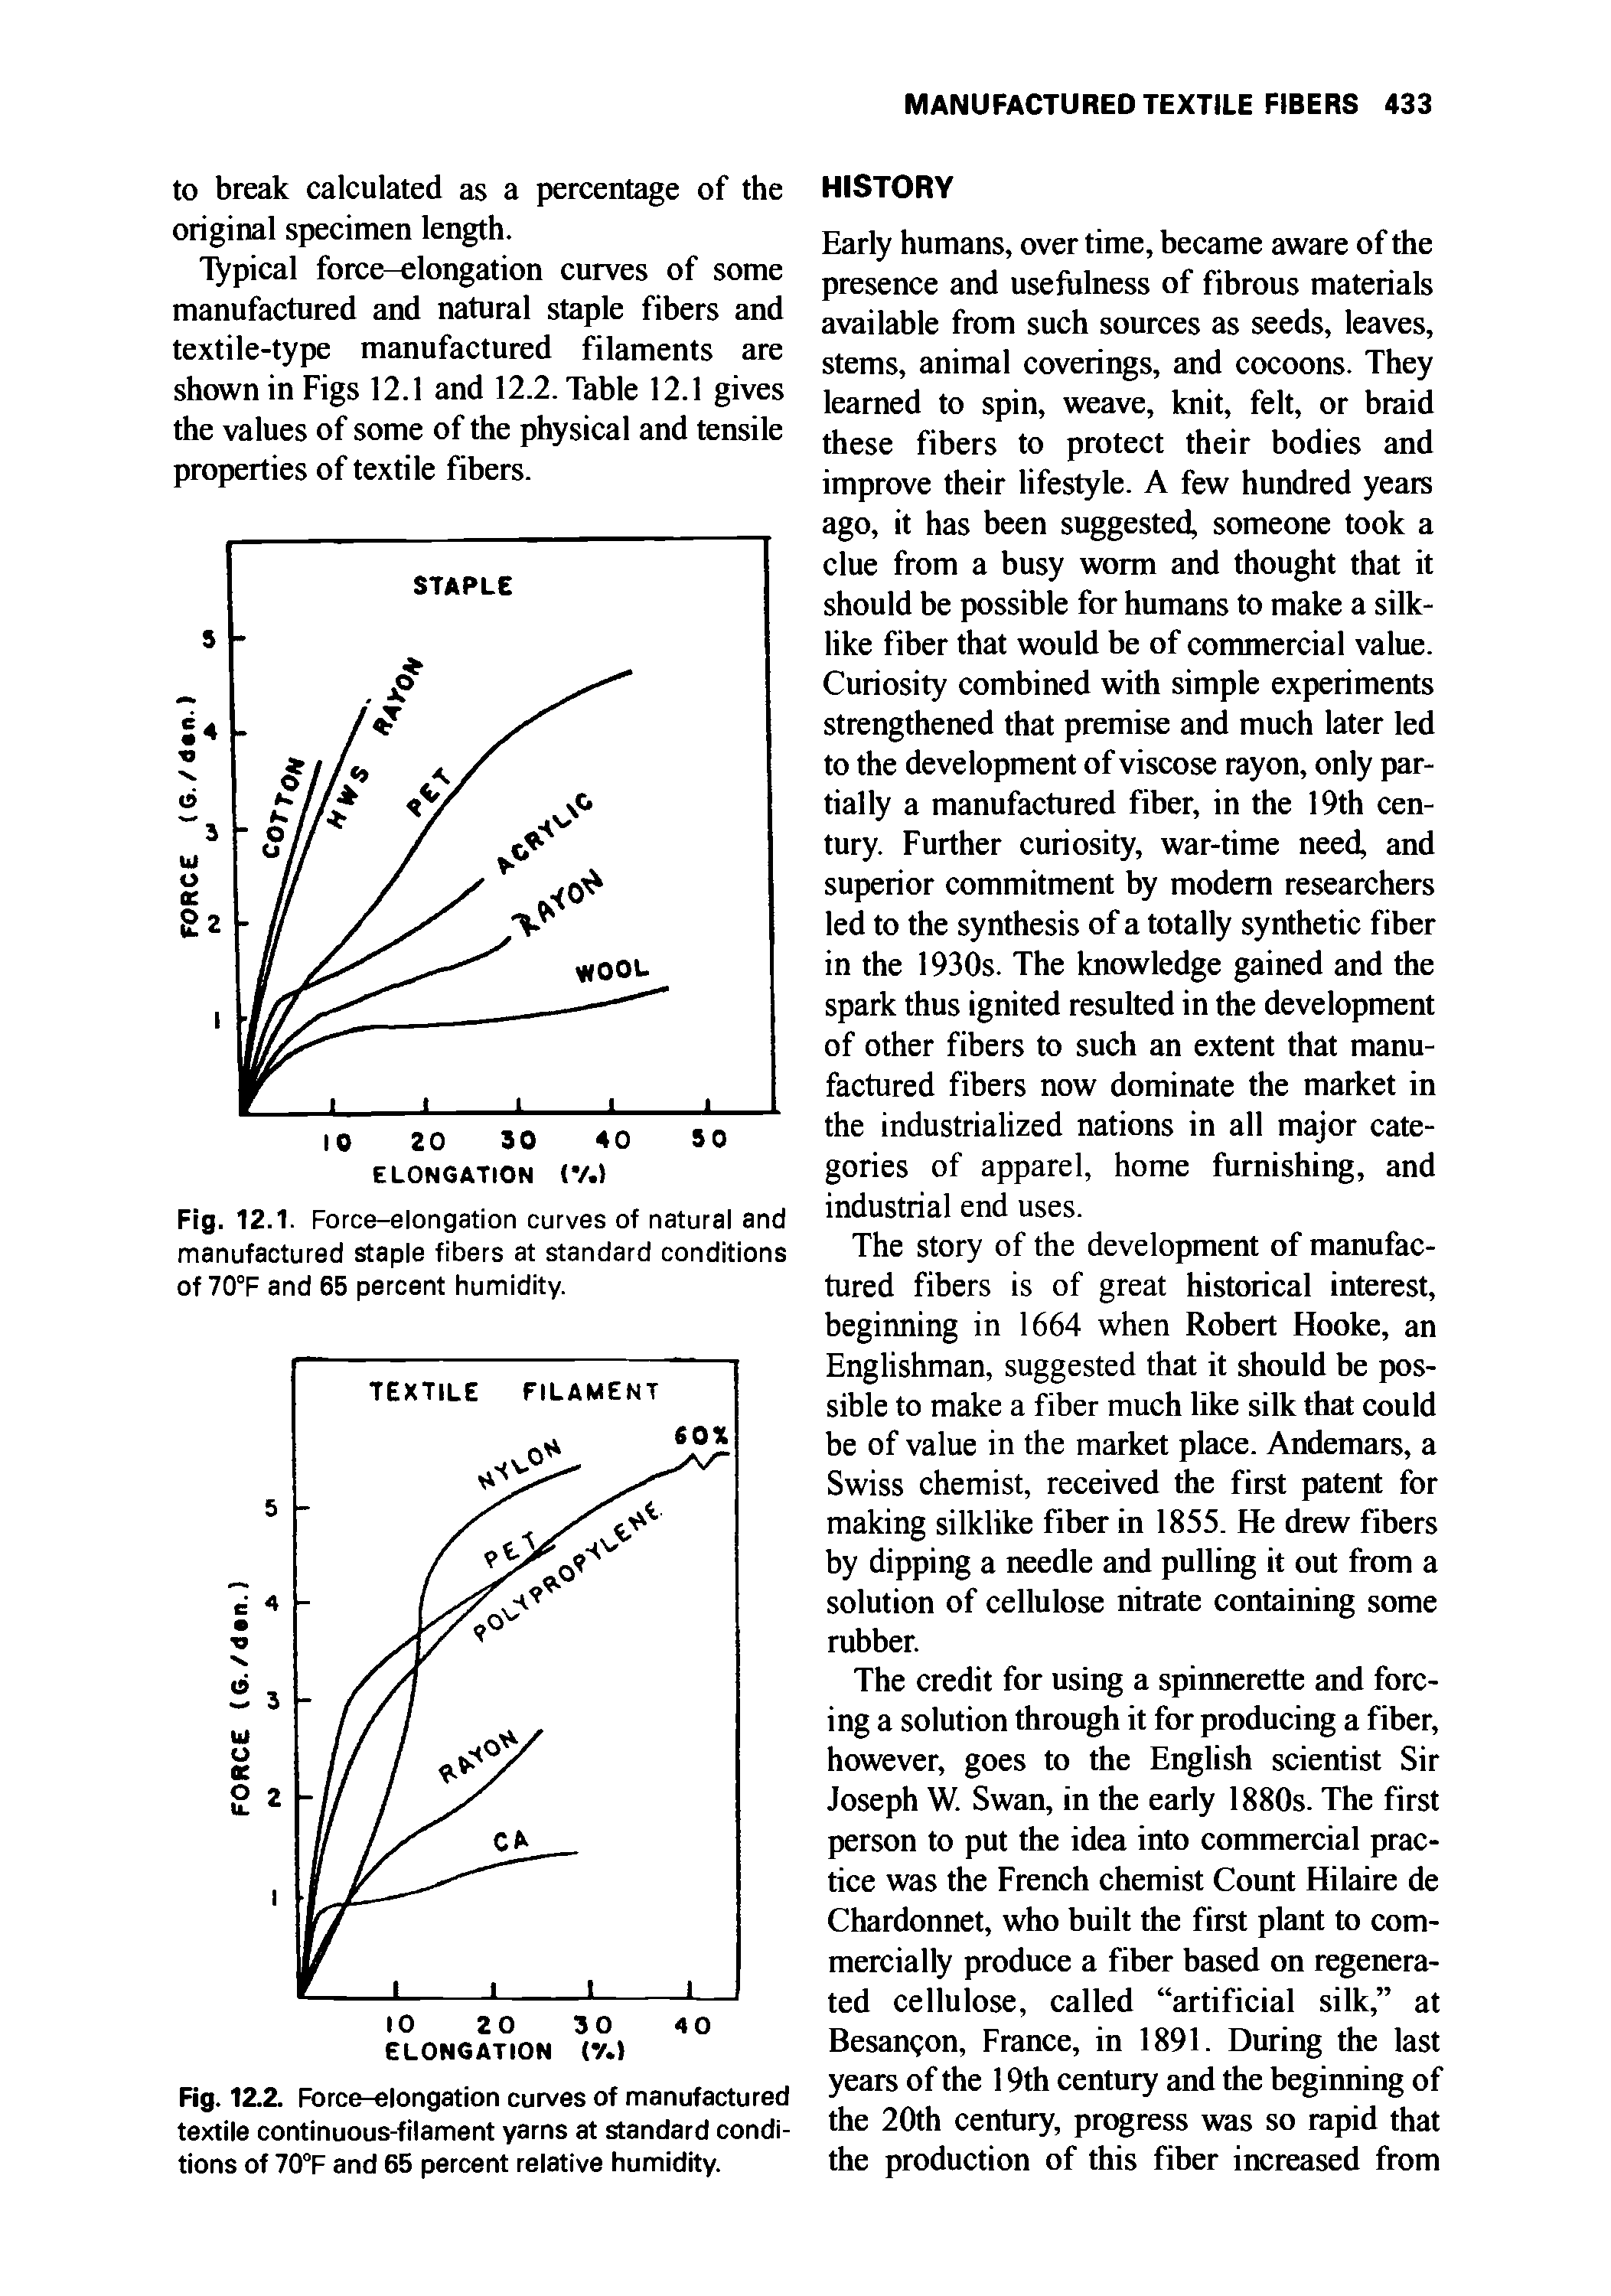 Fig. 12.1. Force-elongation curves of natural and manufactured staple fibers at standard conditions of 70°F and 65 percent humidity.